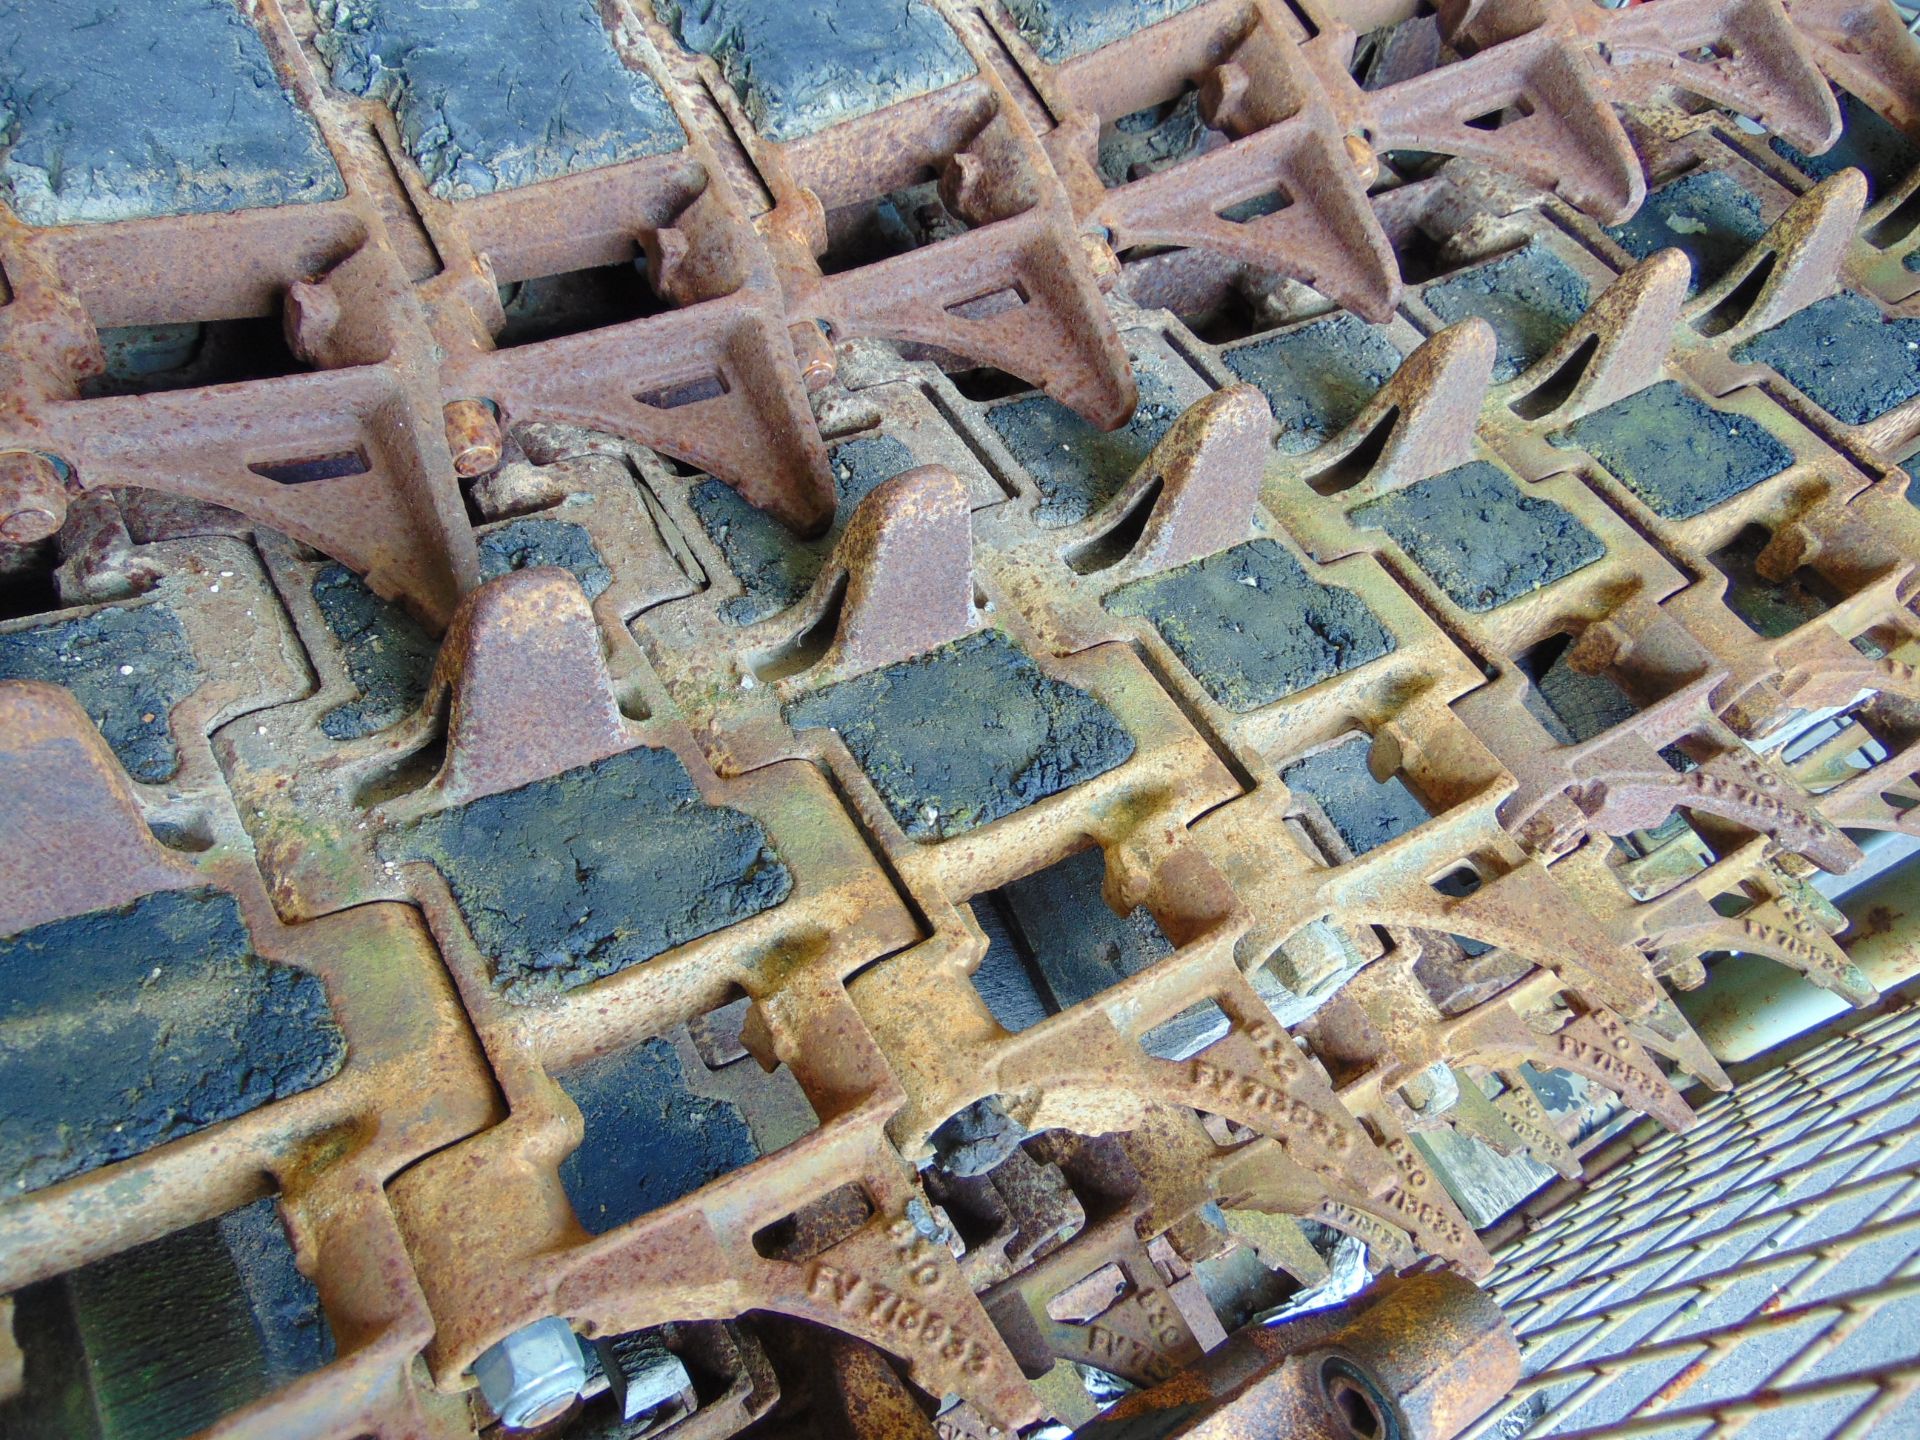 These 16 x CVRT 10 Link Track Sections - Image 4 of 4